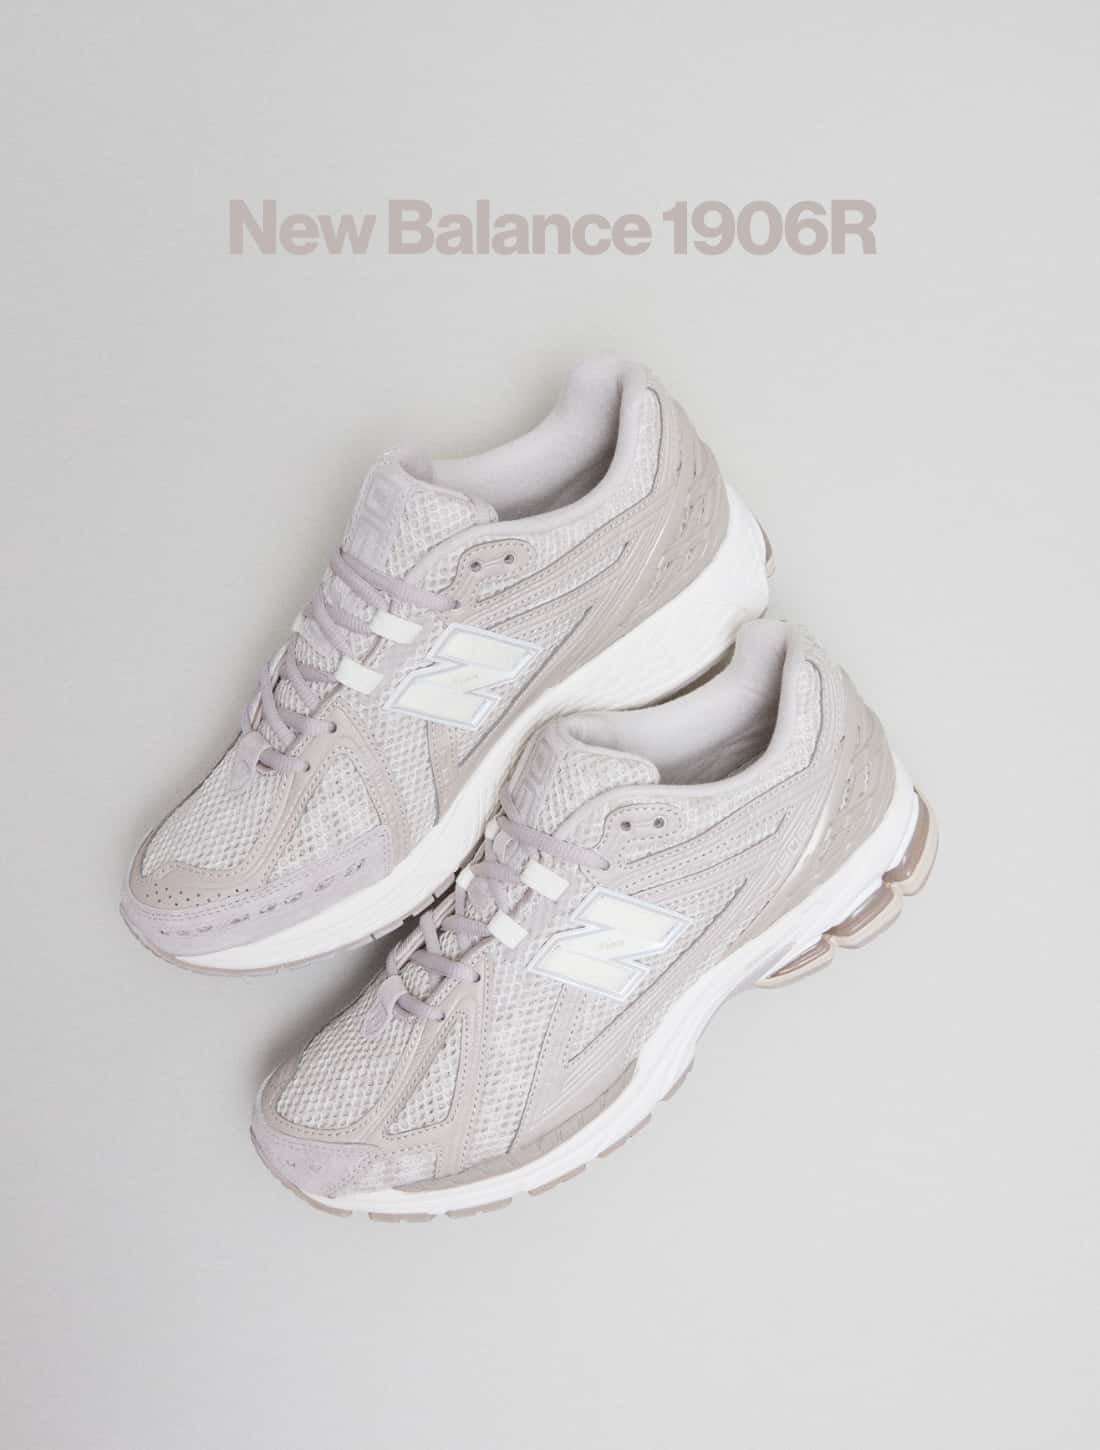 New Balance is expanding their "Protection Pack" for Spring Summer 2022